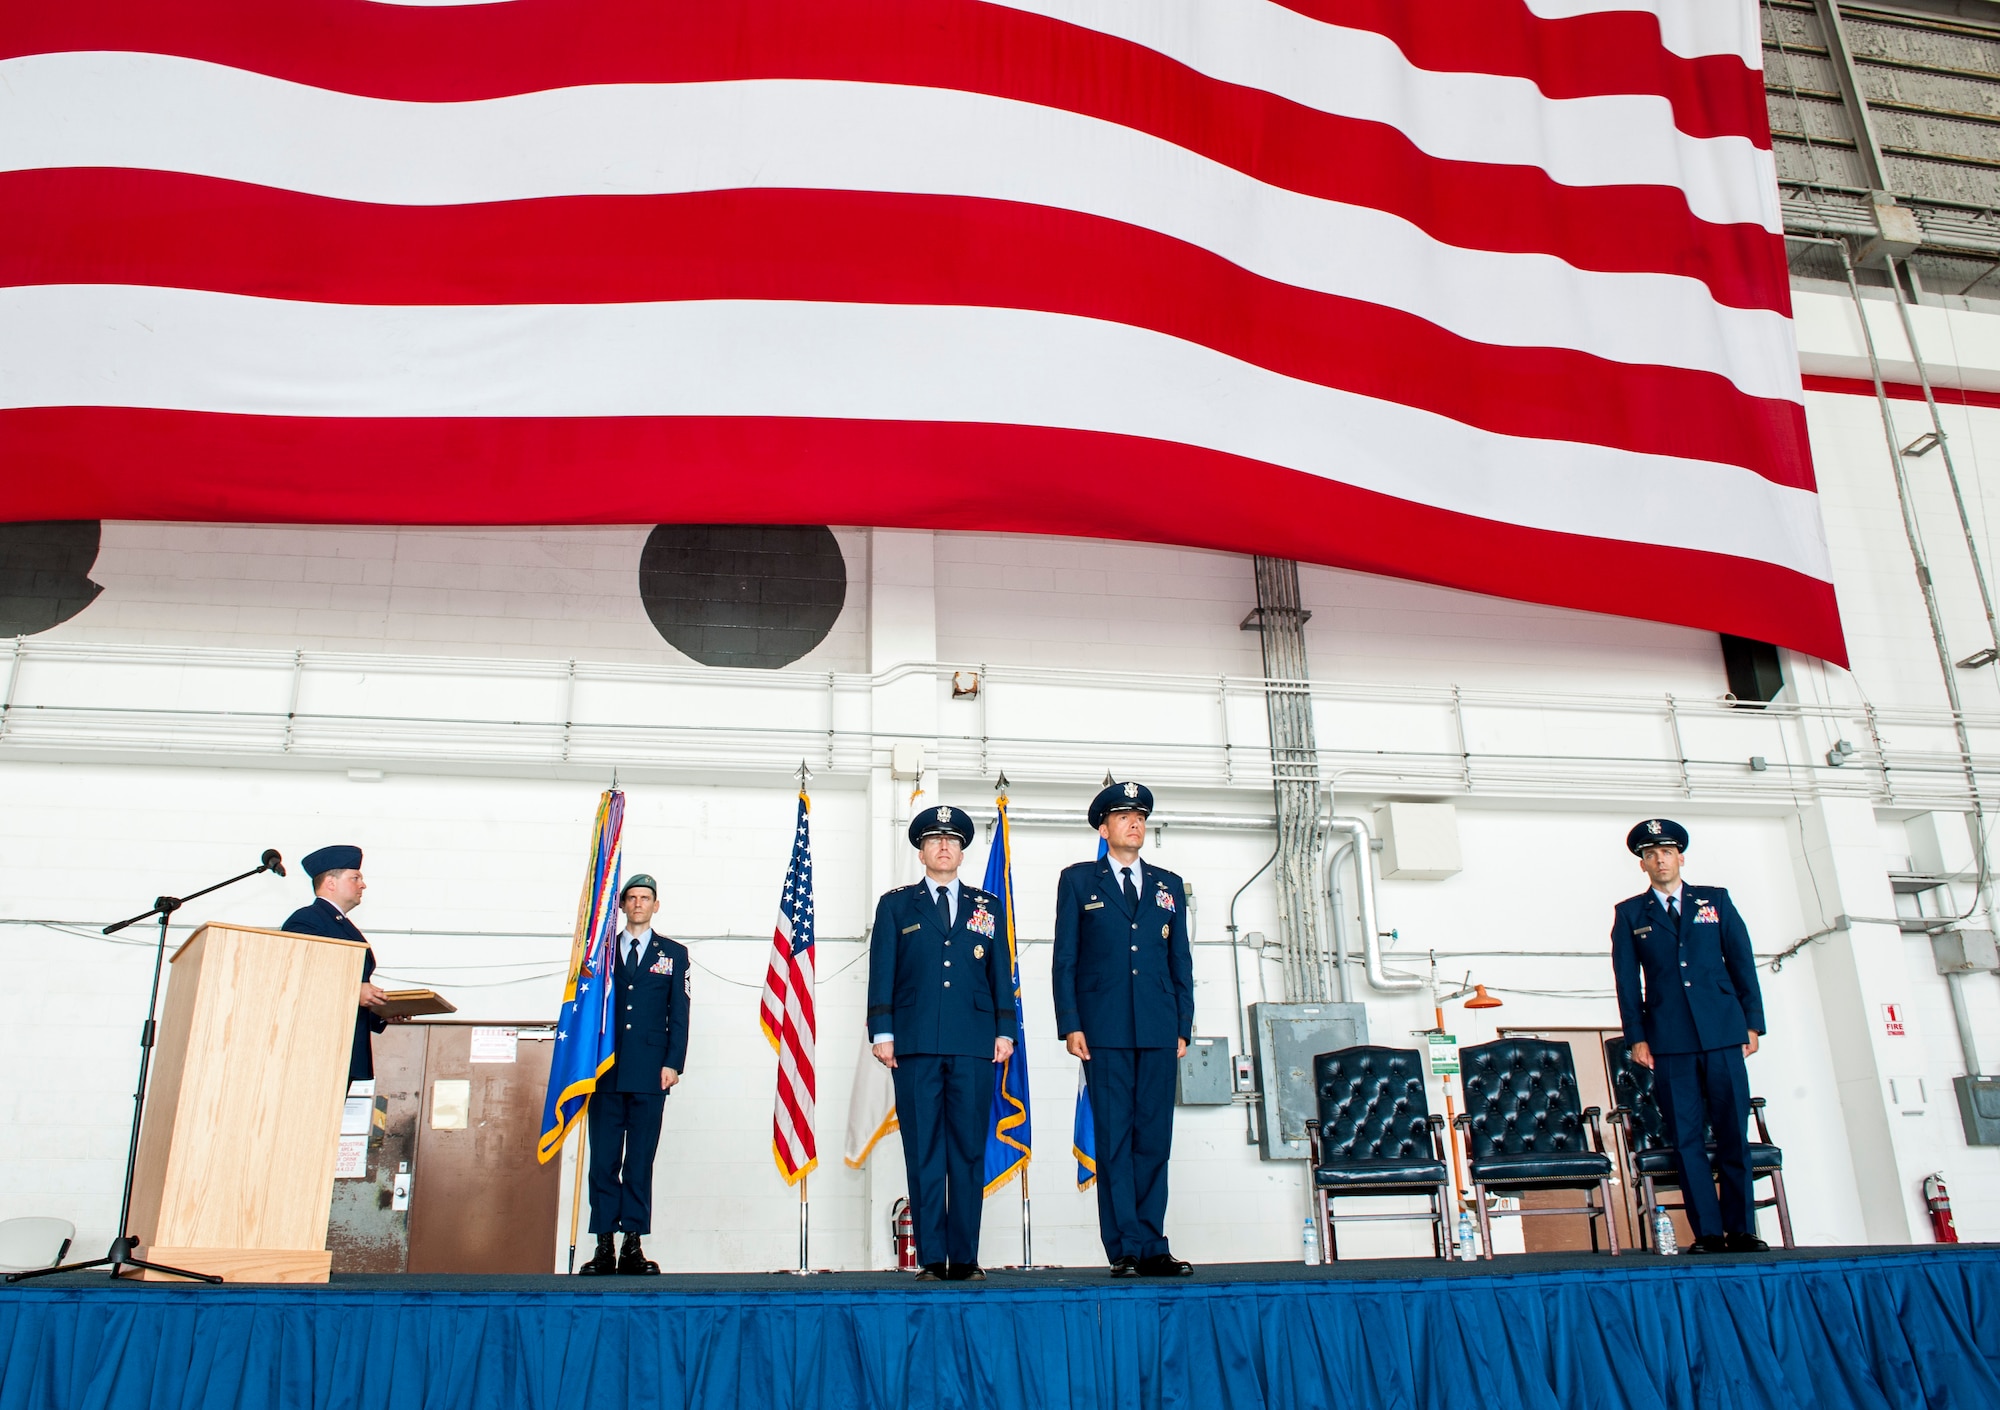 Col. Jason Kirby relinquished command of the 353rd Special Operations Group (SOG) to Col. Michael Thomas during a change of command ceremony on 3 July, 2019. 
Lt. Gen. James Slife, Air Force Special Operations Command commander, presided over the event held inside a hangar where the Airmen of the 353rd SOG and distinguished guests welcomed the new commander.